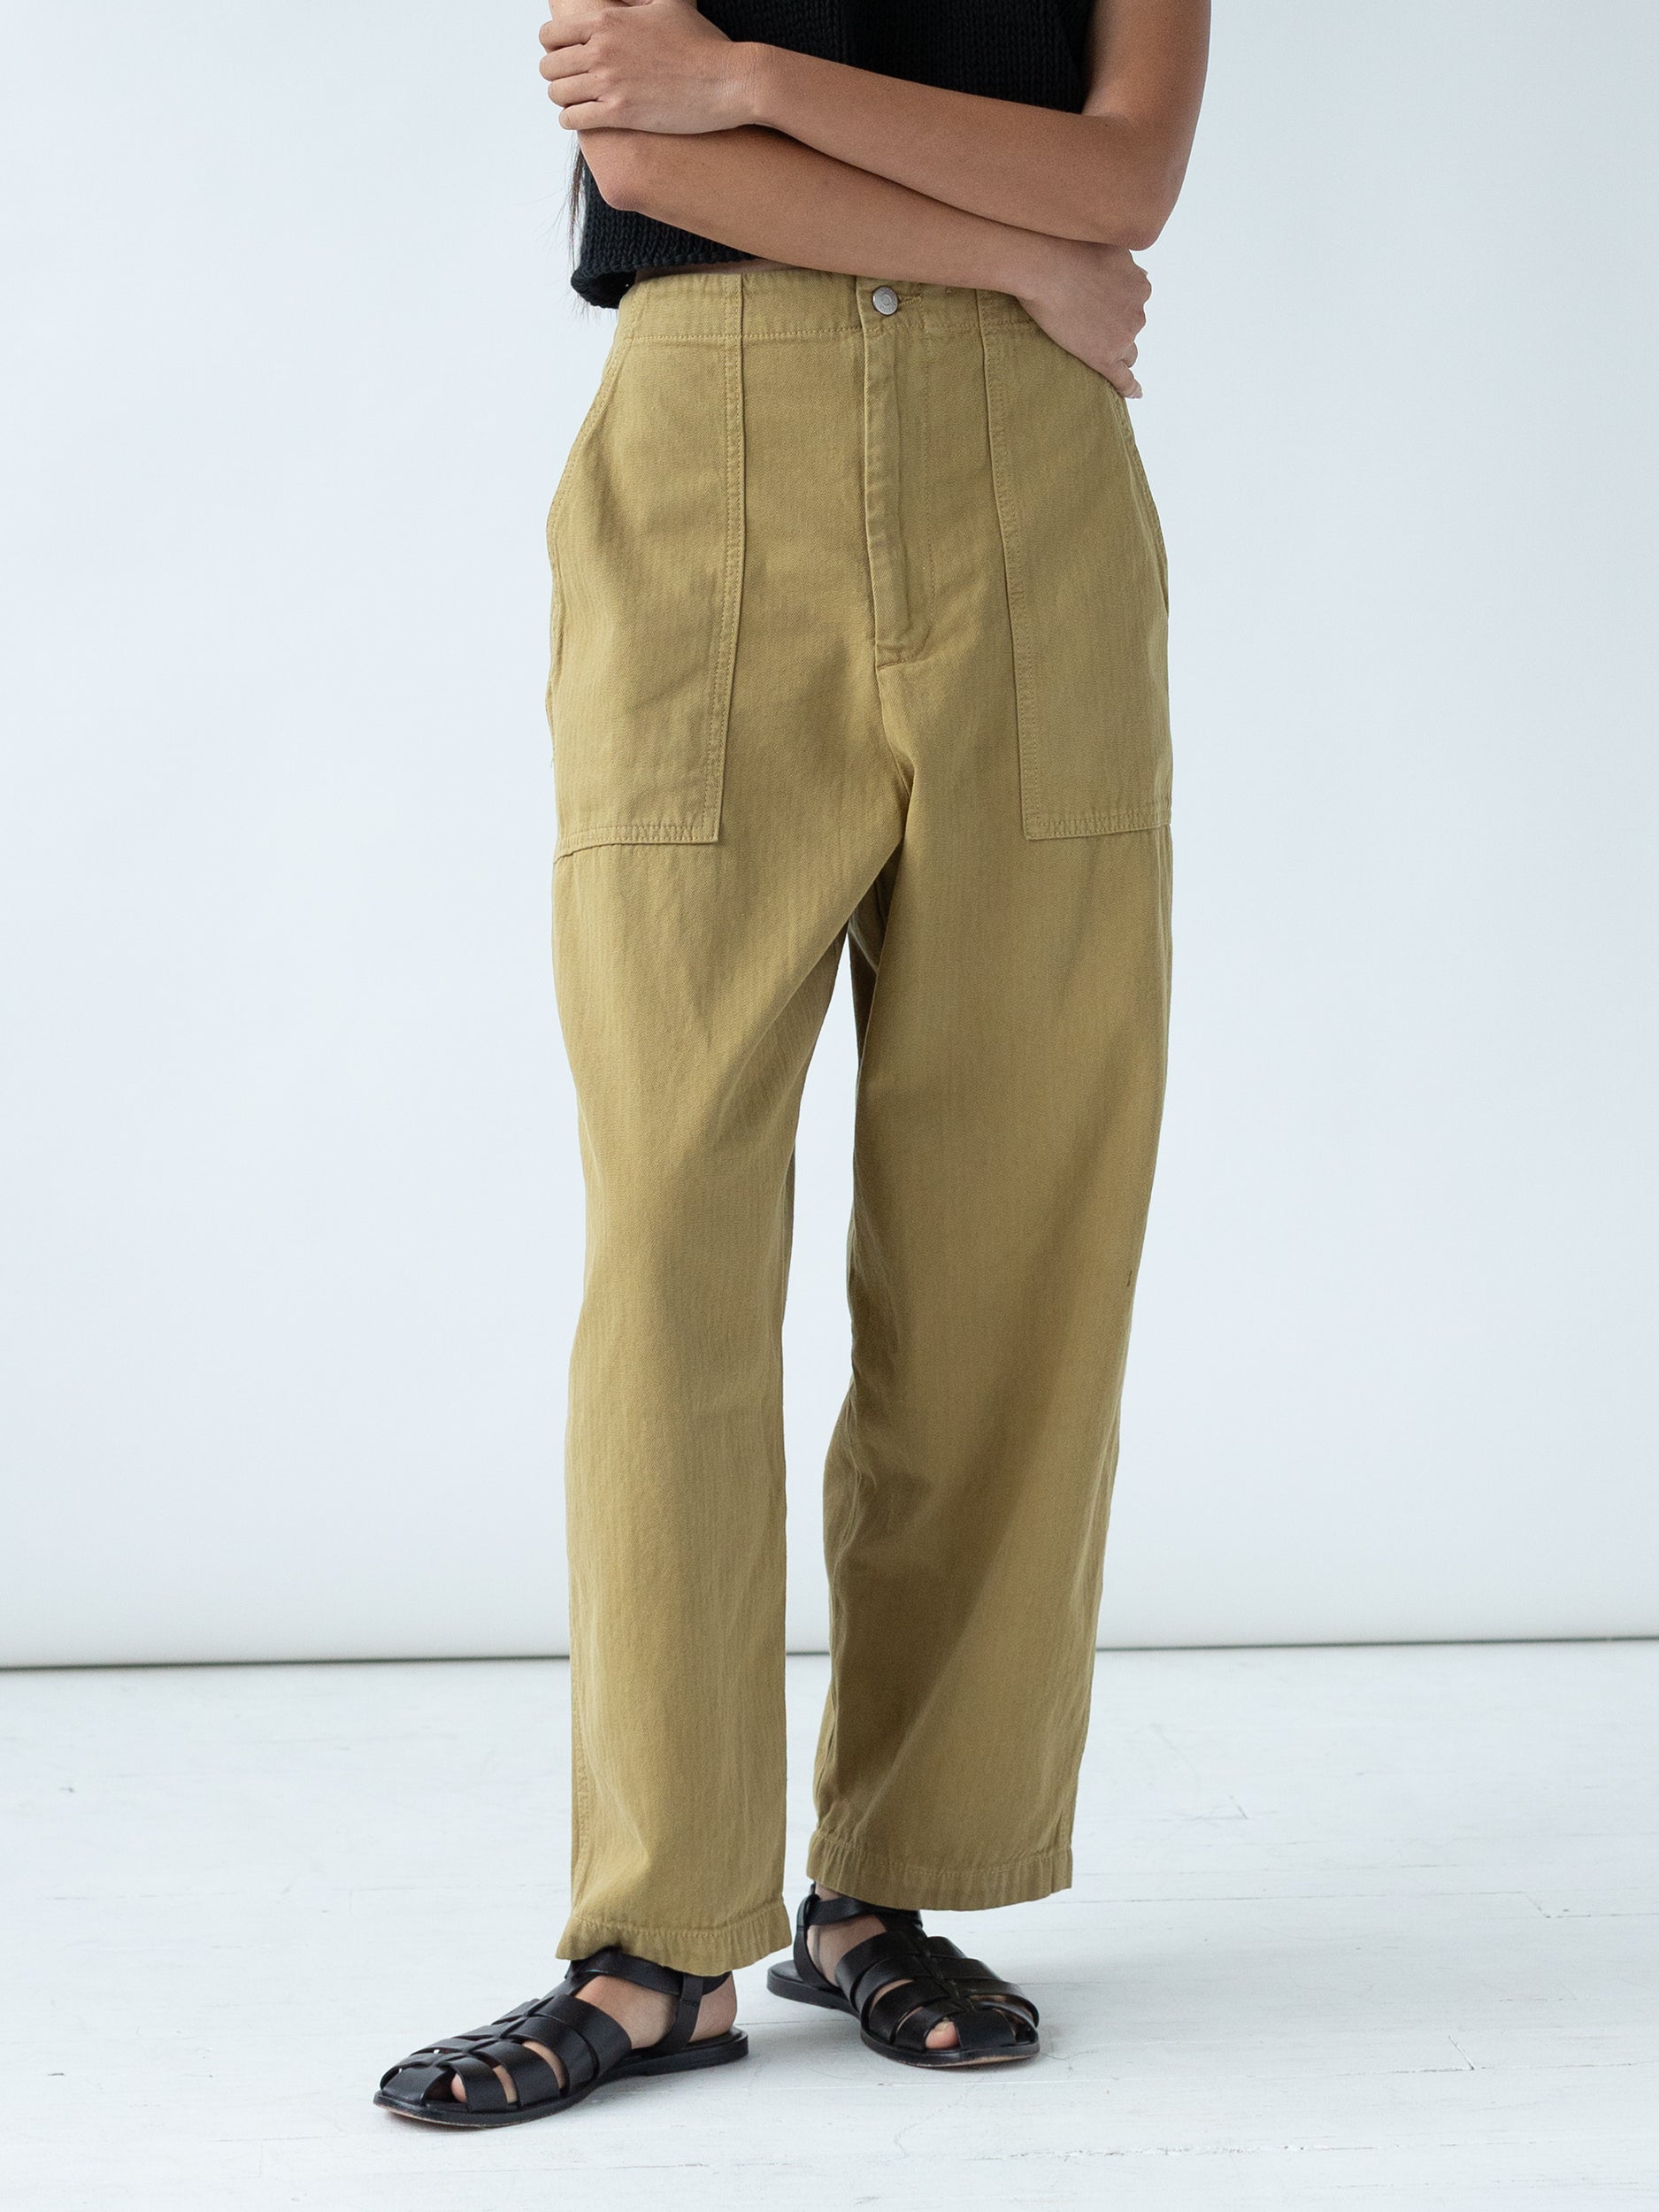 Thumbnail image of Painter Pant in Ochre